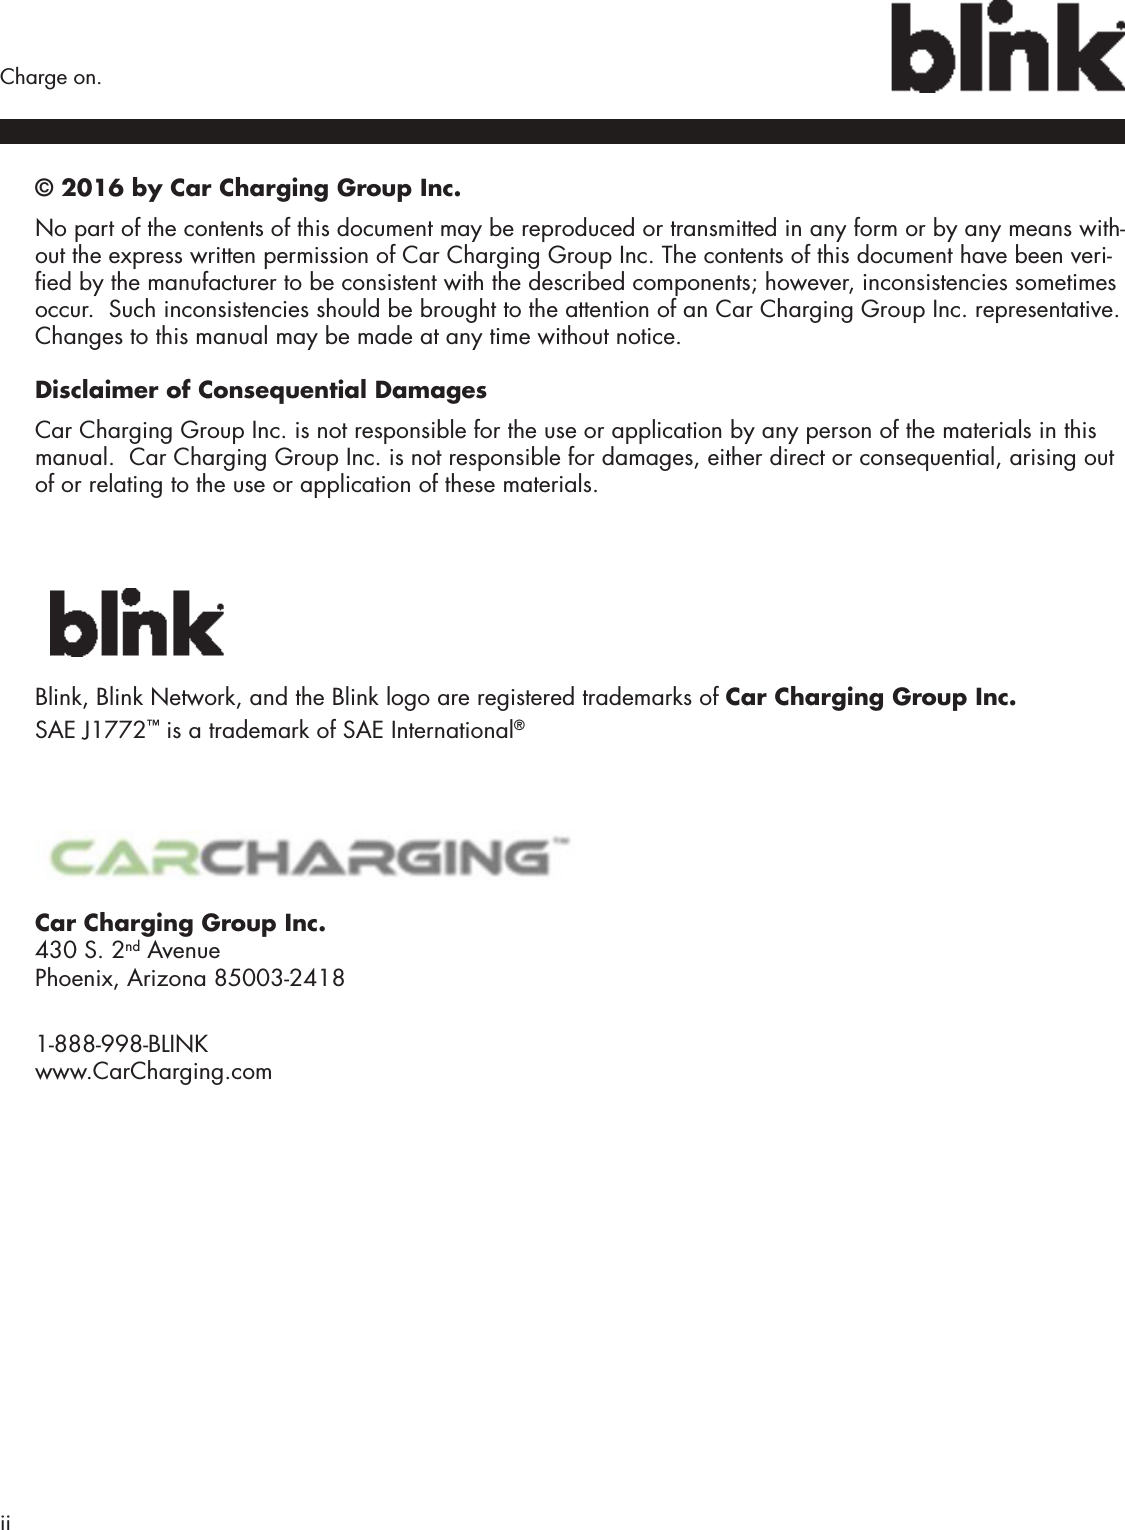 ii  Charge on.© 2016 by Car Charging Group Inc.No part of the contents of this document may be reproduced or transmitted in any form or by any means with-out the express written permission of Car Charging Group Inc. The contents of this document have been veri-ed by the manufacturer to be consistent with the described components; however, inconsistencies sometimes occur.  Such inconsistencies should be brought to the attention of an Car Charging Group Inc. representative. Changes to this manual may be made at any time without notice.Disclaimer of Consequential DamagesCar Charging Group Inc. is not responsible for the use or application by any person of the materials in this manual.  Car Charging Group Inc. is not responsible for damages, either direct or consequential, arising out of or relating to the use or application of these materials.Blink, Blink Network, and the Blink logo are registered trademarks of Car Charging Group Inc. SAE J1772™ is a trademark of SAE International®Car Charging Group Inc. 430 S. 2nd Avenue Phoenix, Arizona 85003-2418 1-888-998-BLINK www.CarCharging.com